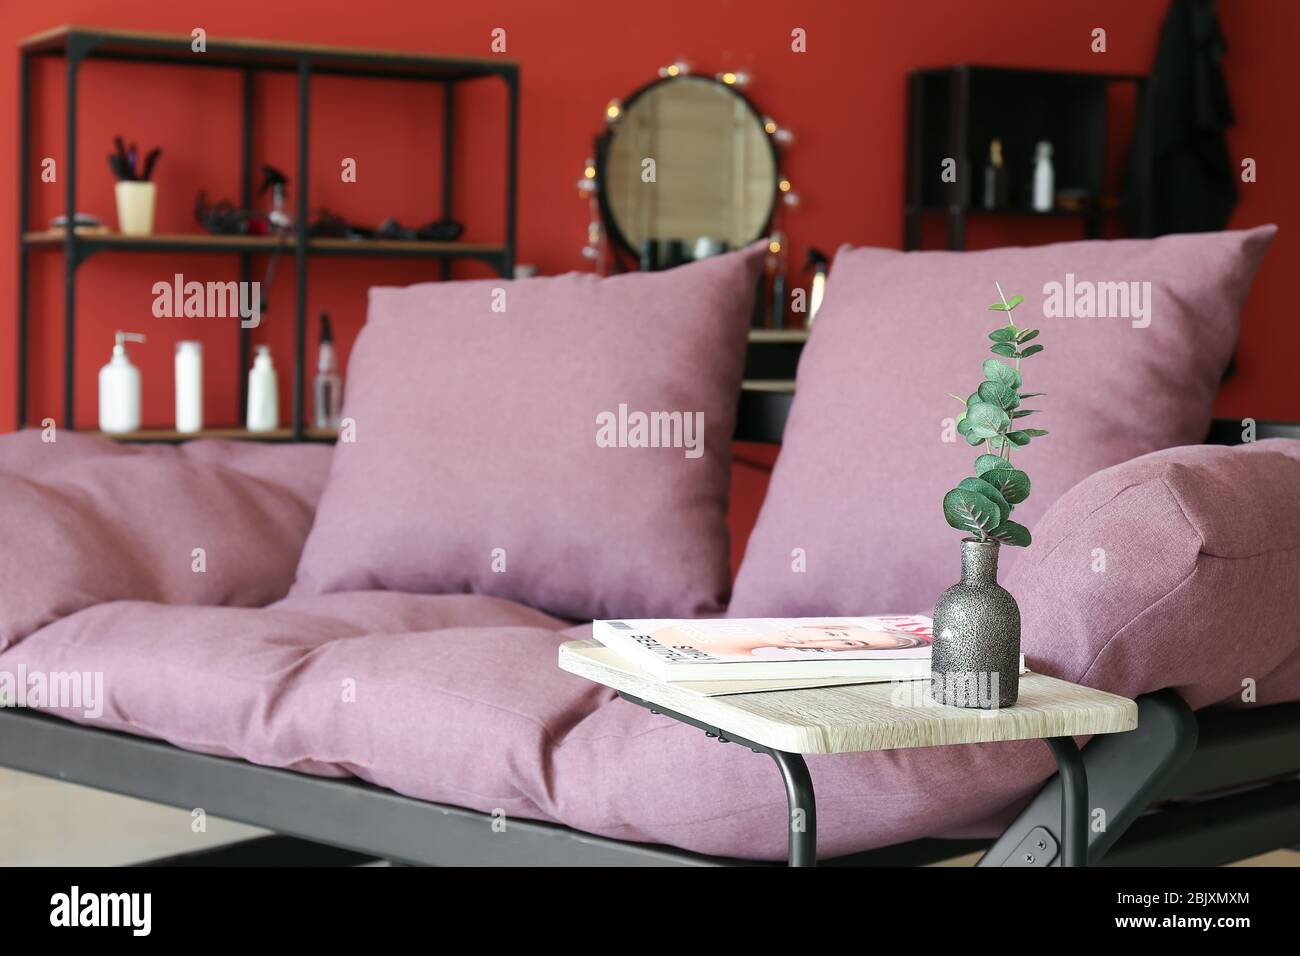 Sofa and fashion magazines in modern hairdressing salon Stock Photo